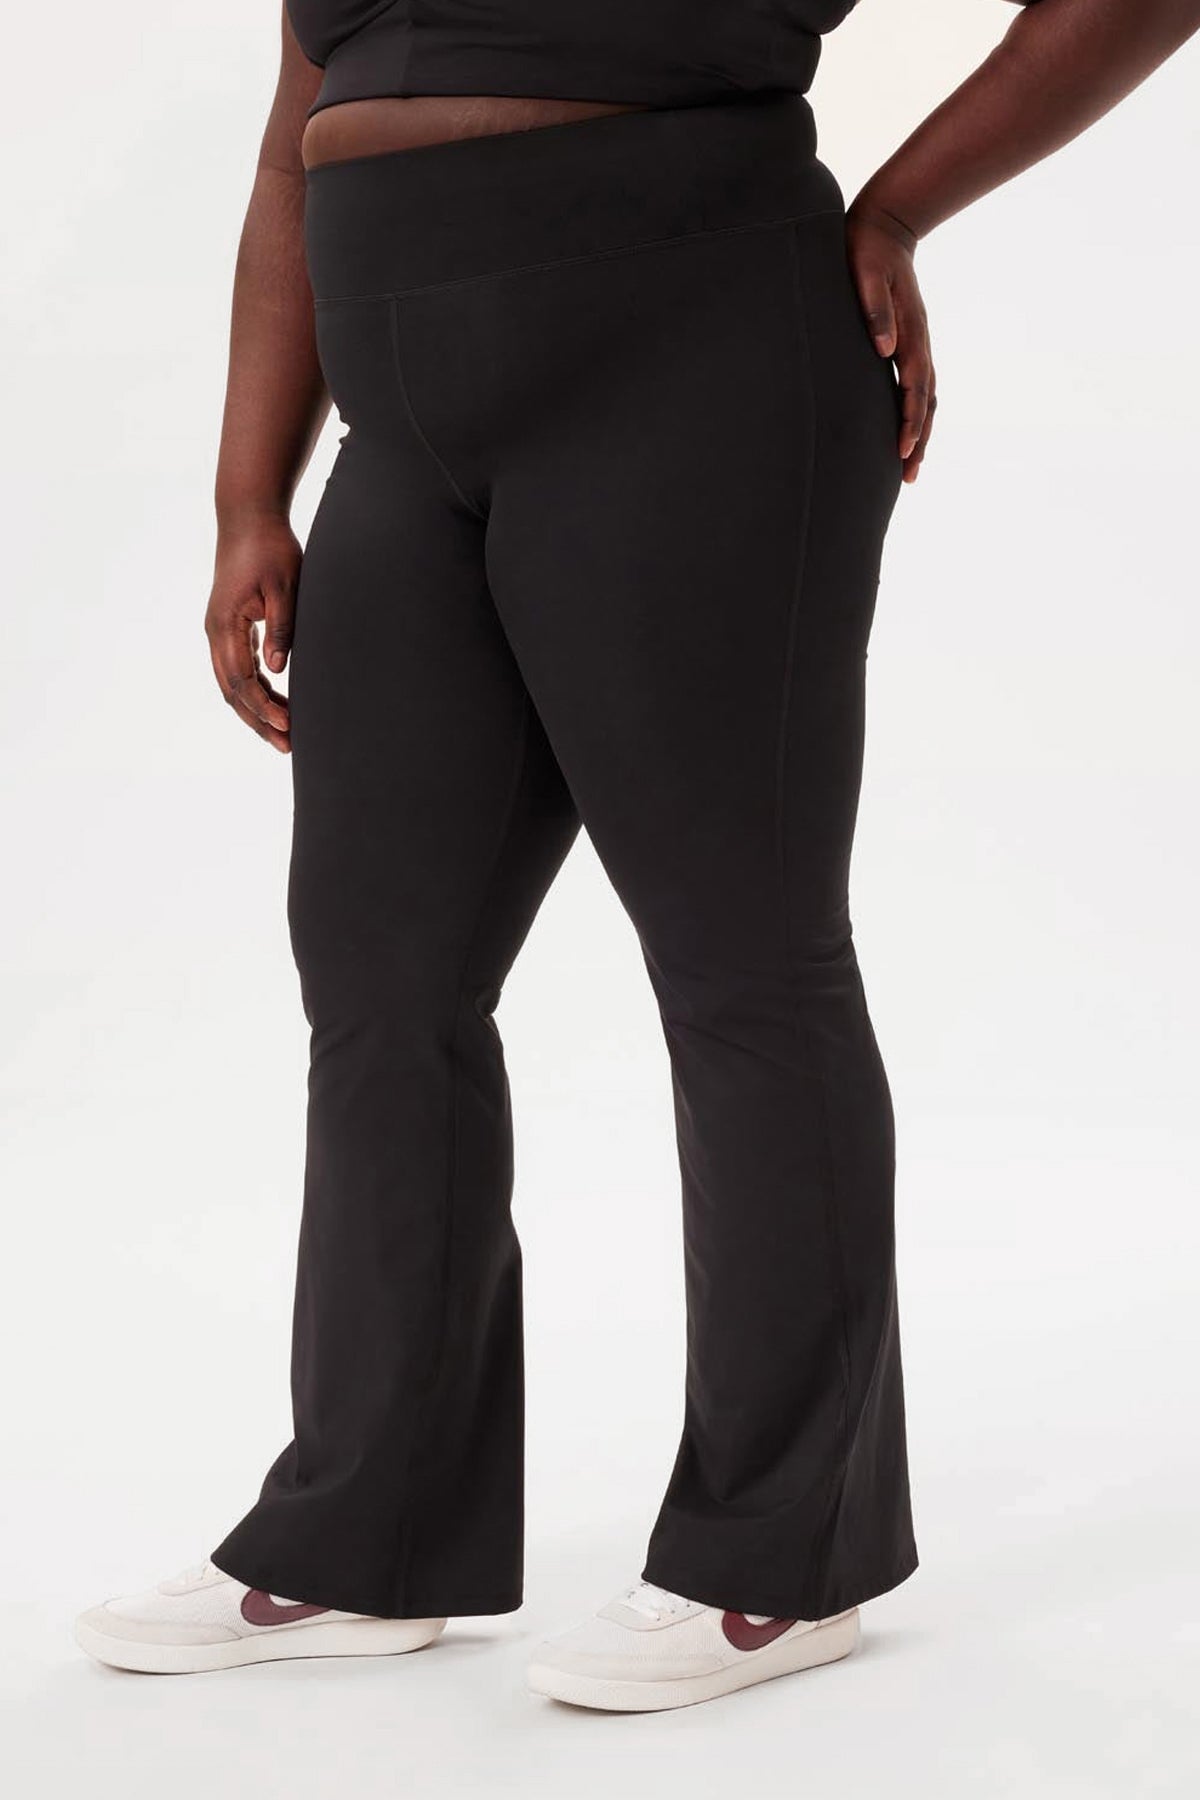 Girlfriend Collective High Rise Compressive Legging in Plum Size XS - $50 -  From Jacqueline